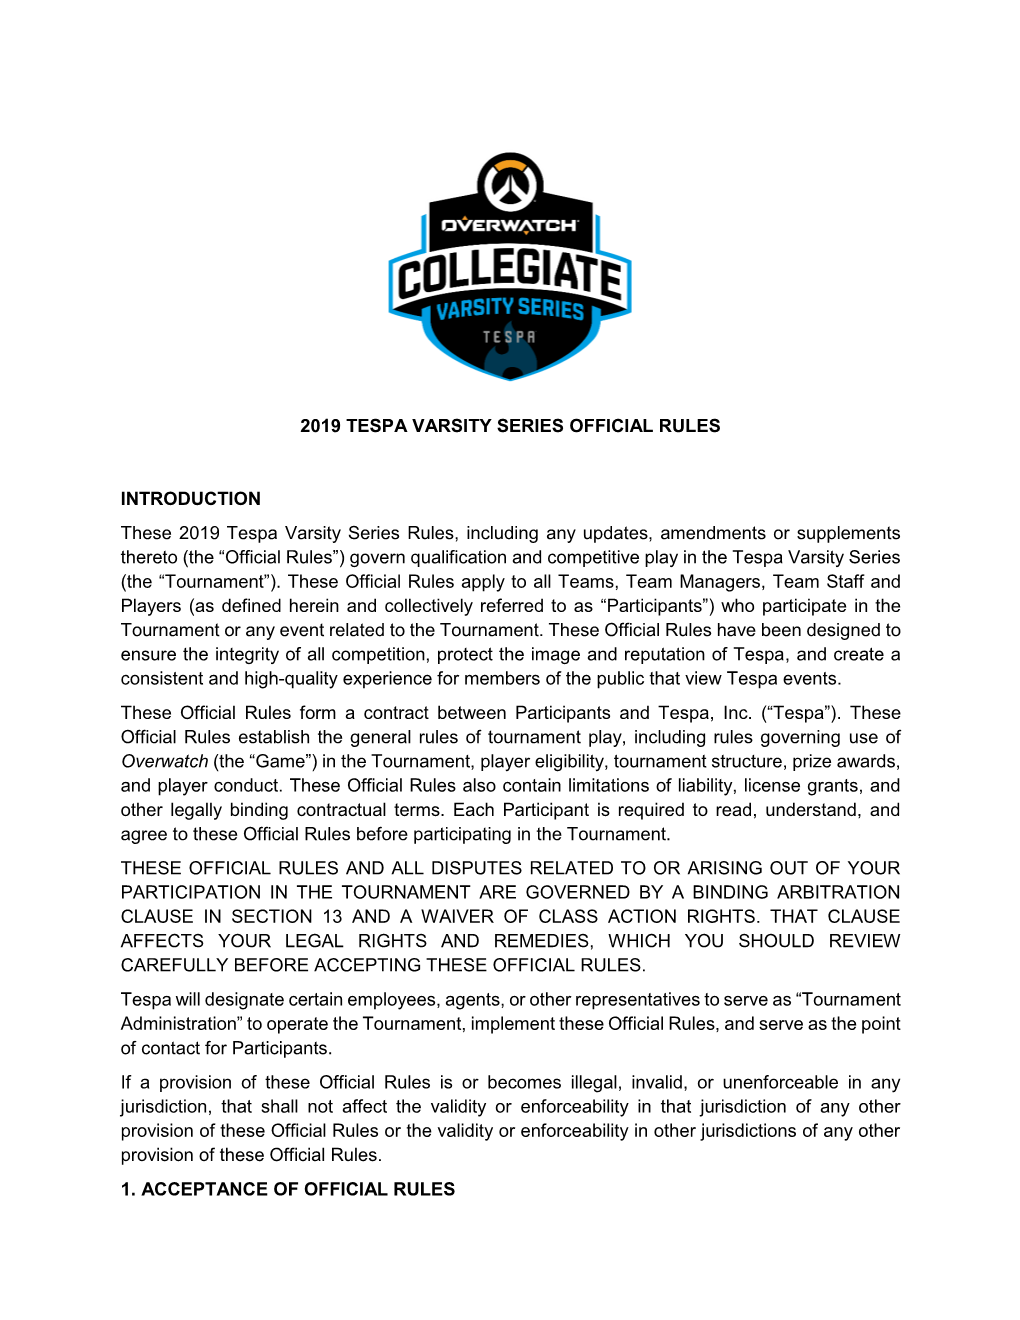 2019 Tespa Varsity Series Official Rules Introduction